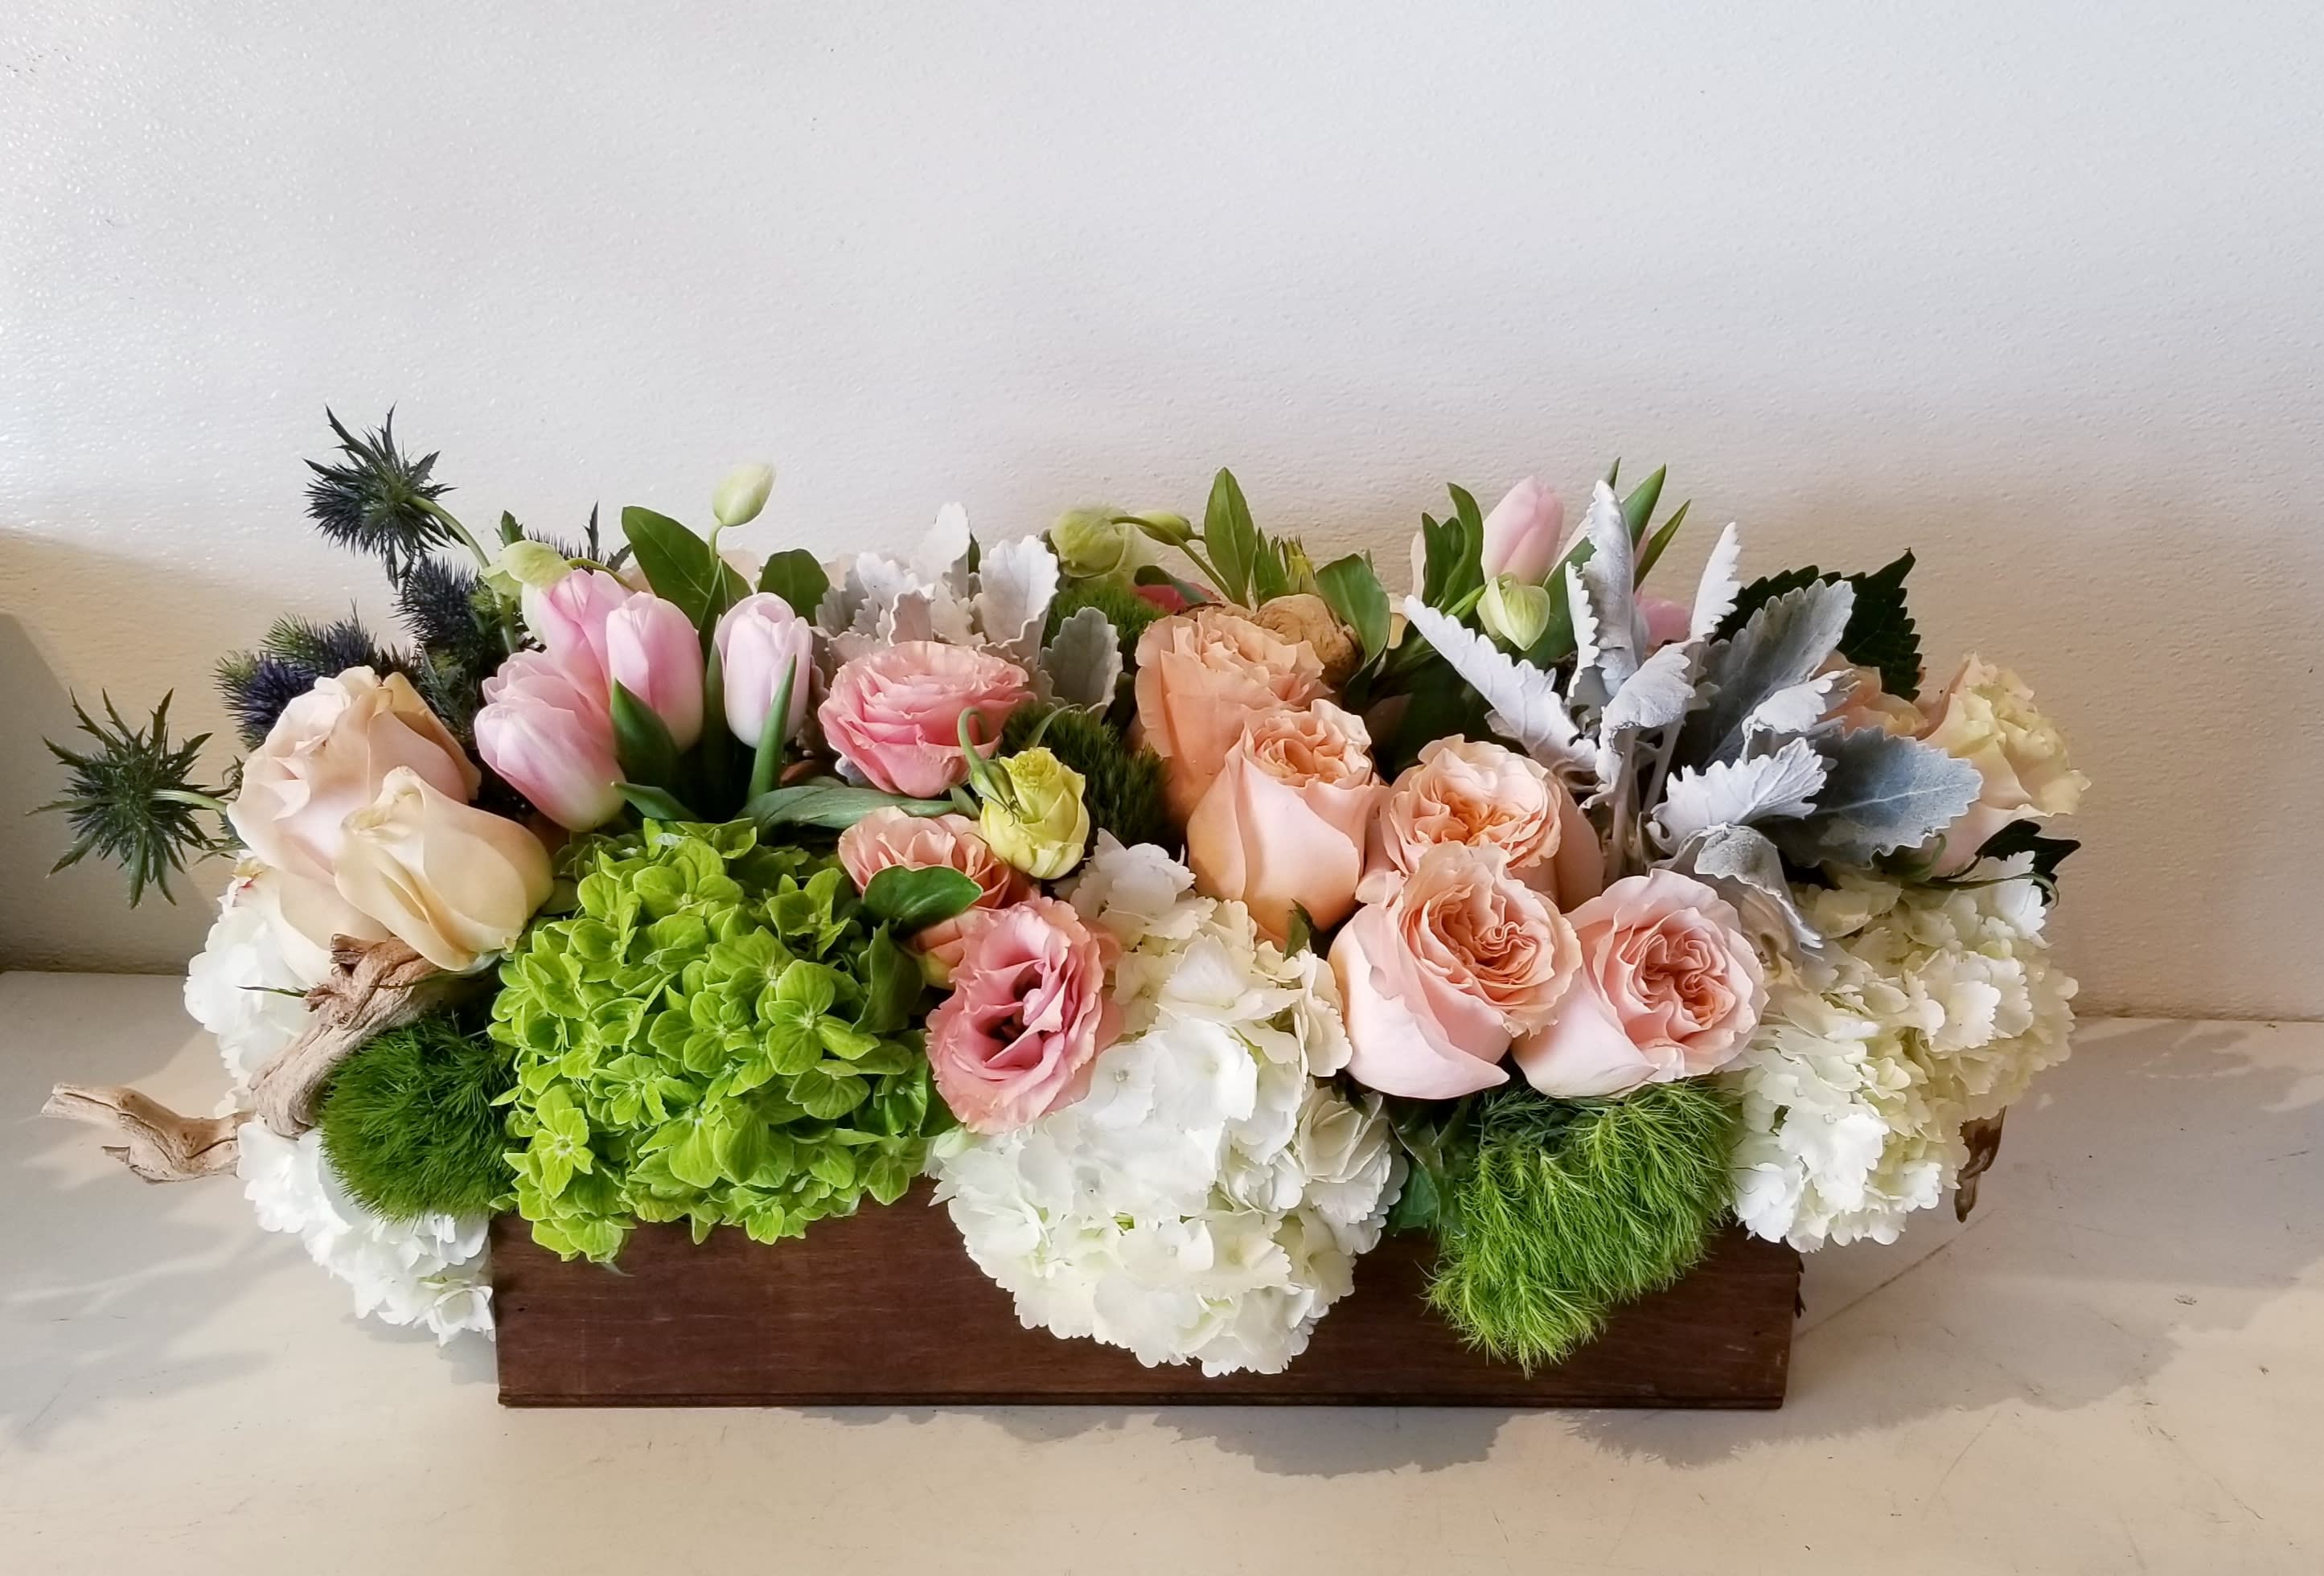 Bohemian Centerpiece - Long and low centerpiece in a brown wood box composed of neutral earthy tone floral blooms accented with driftwood branches. 